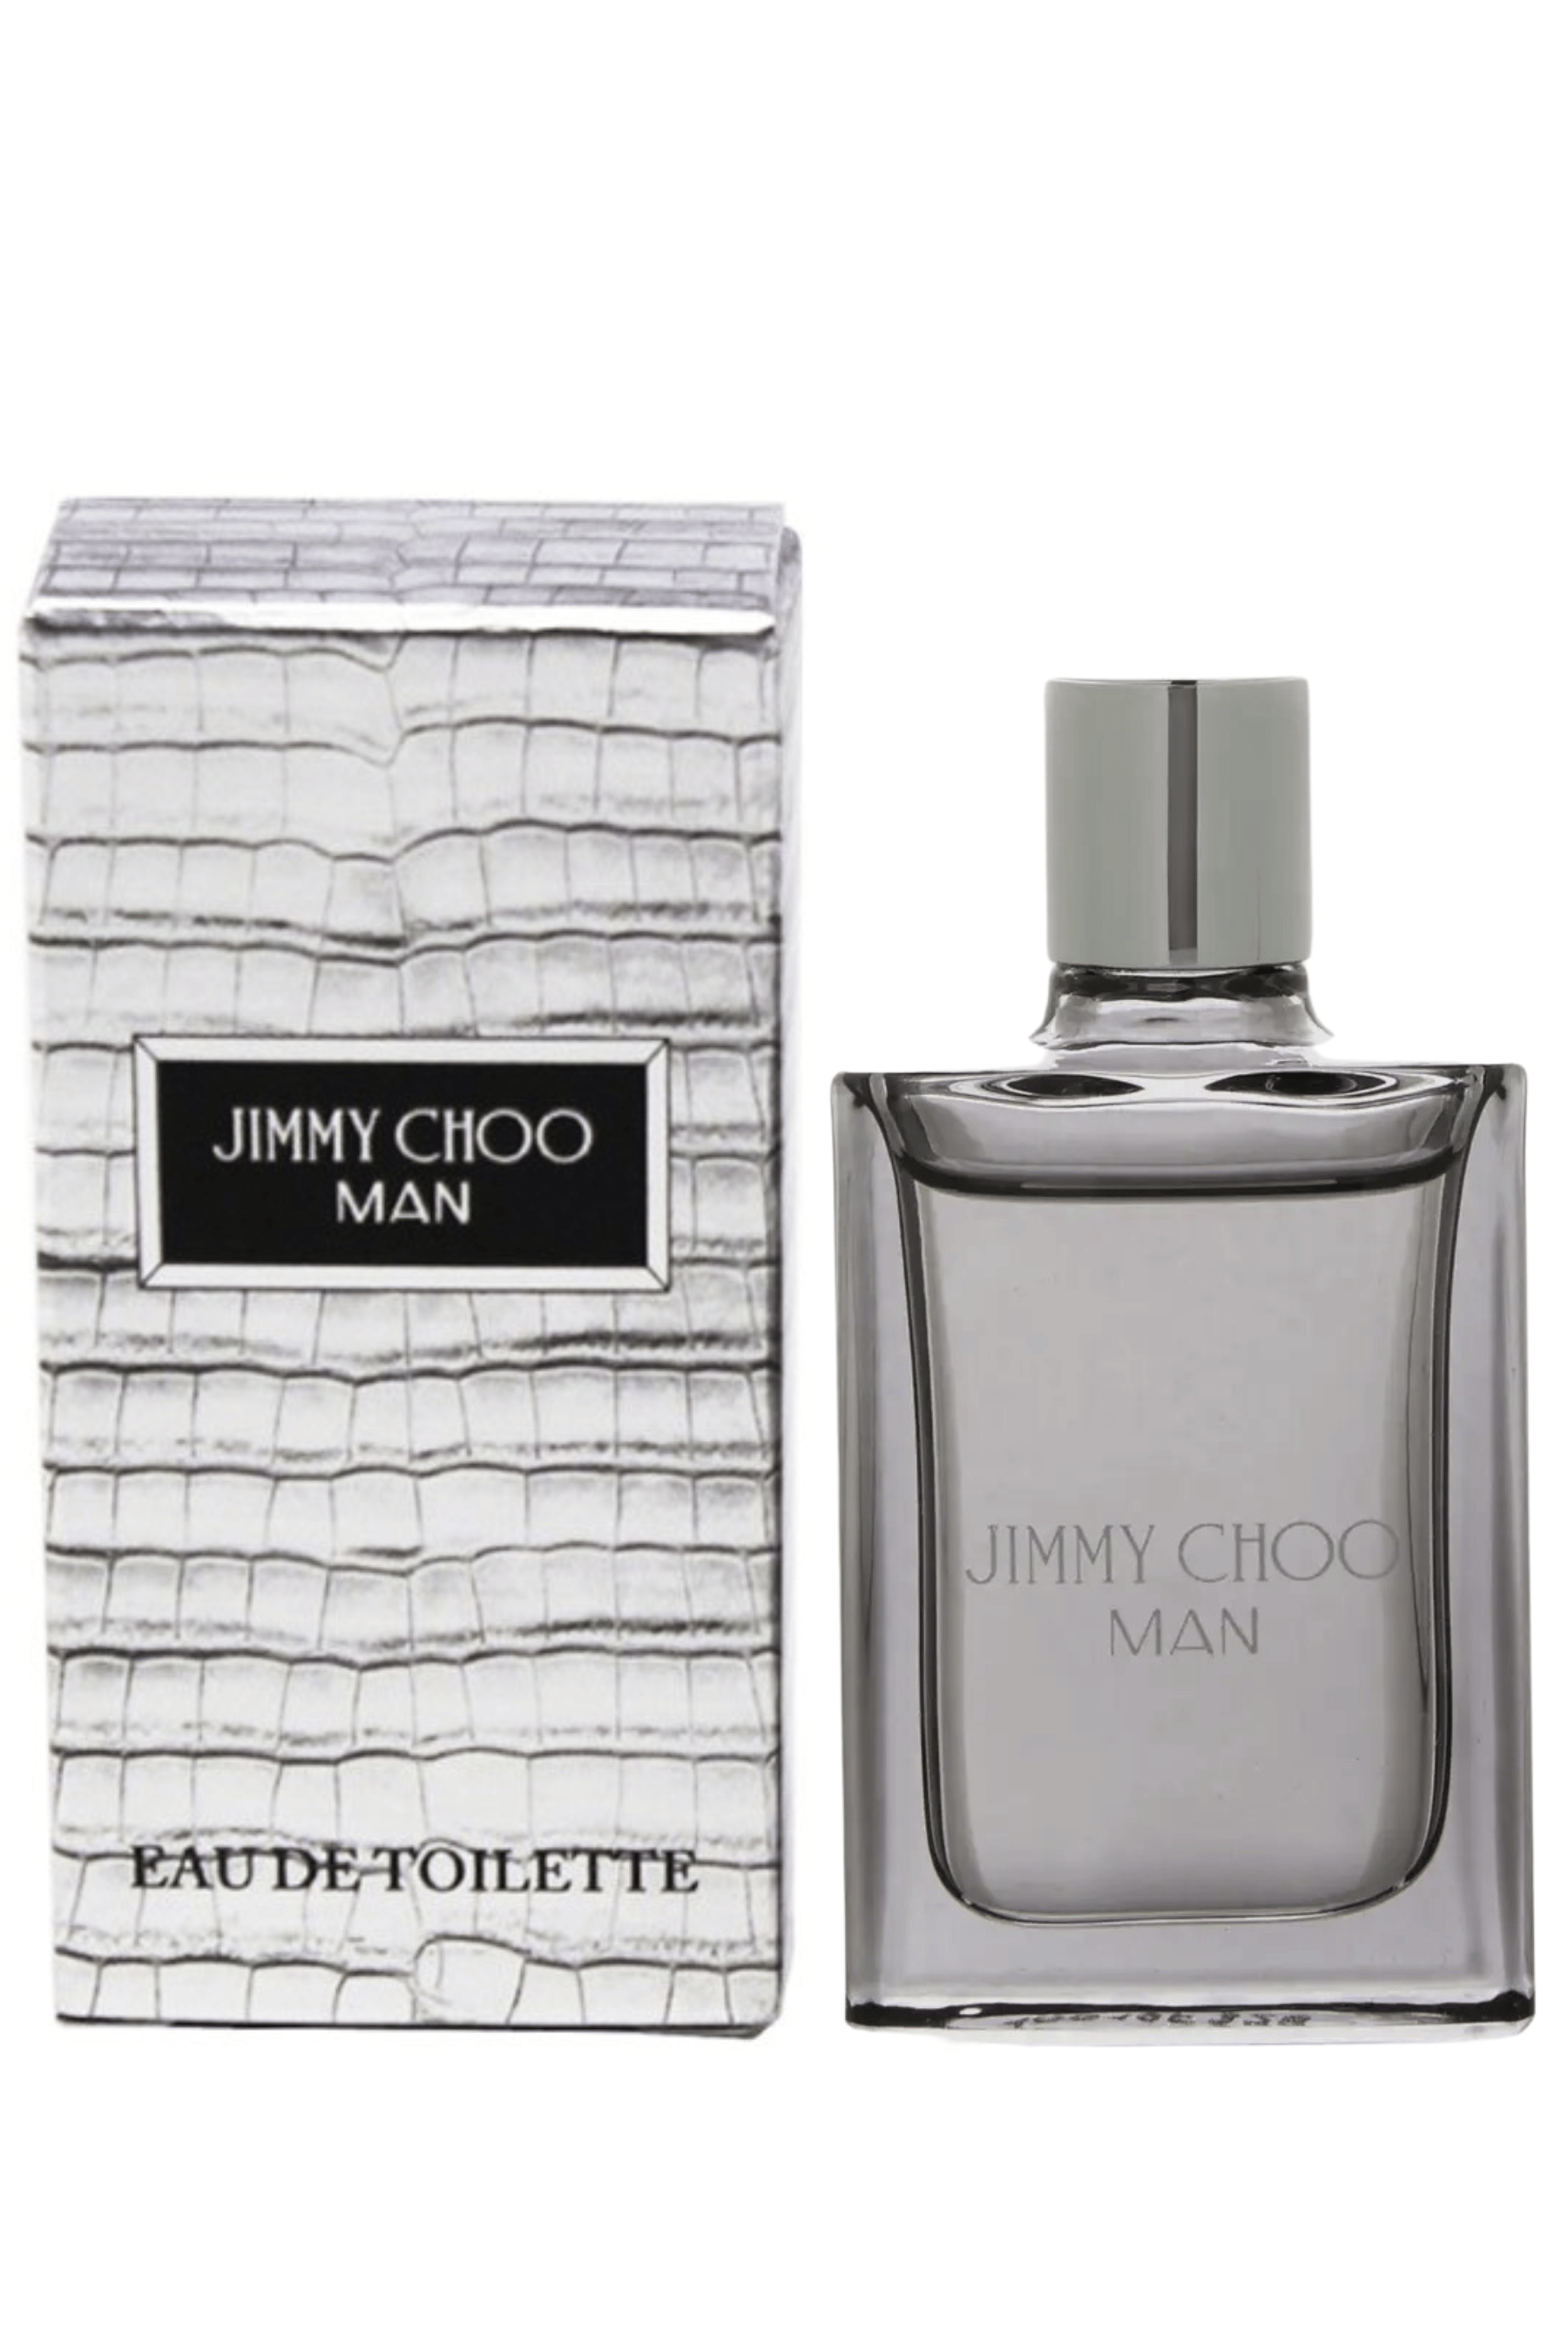 Man Blue Edt by Jimmy Choo Fragrance at ORCHARD MILE